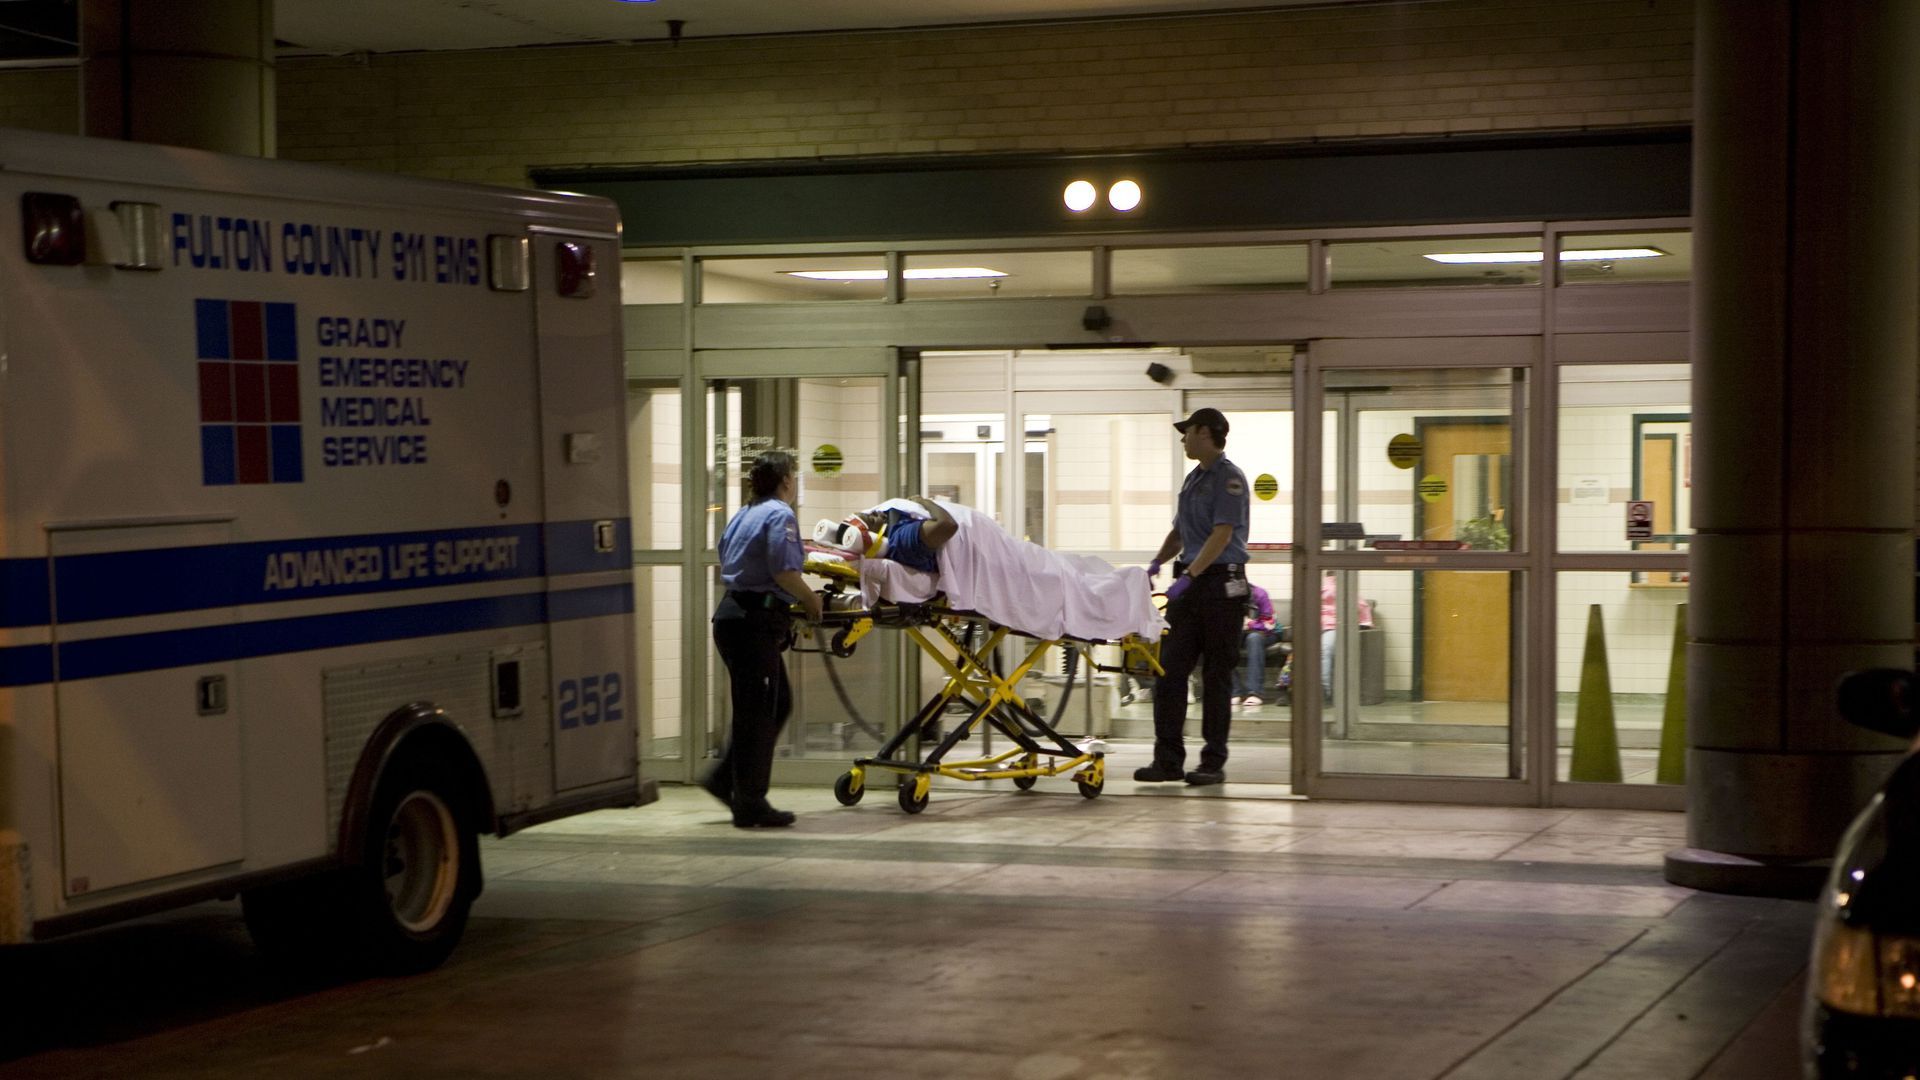 Emergency room stretcher rolling into a hospital